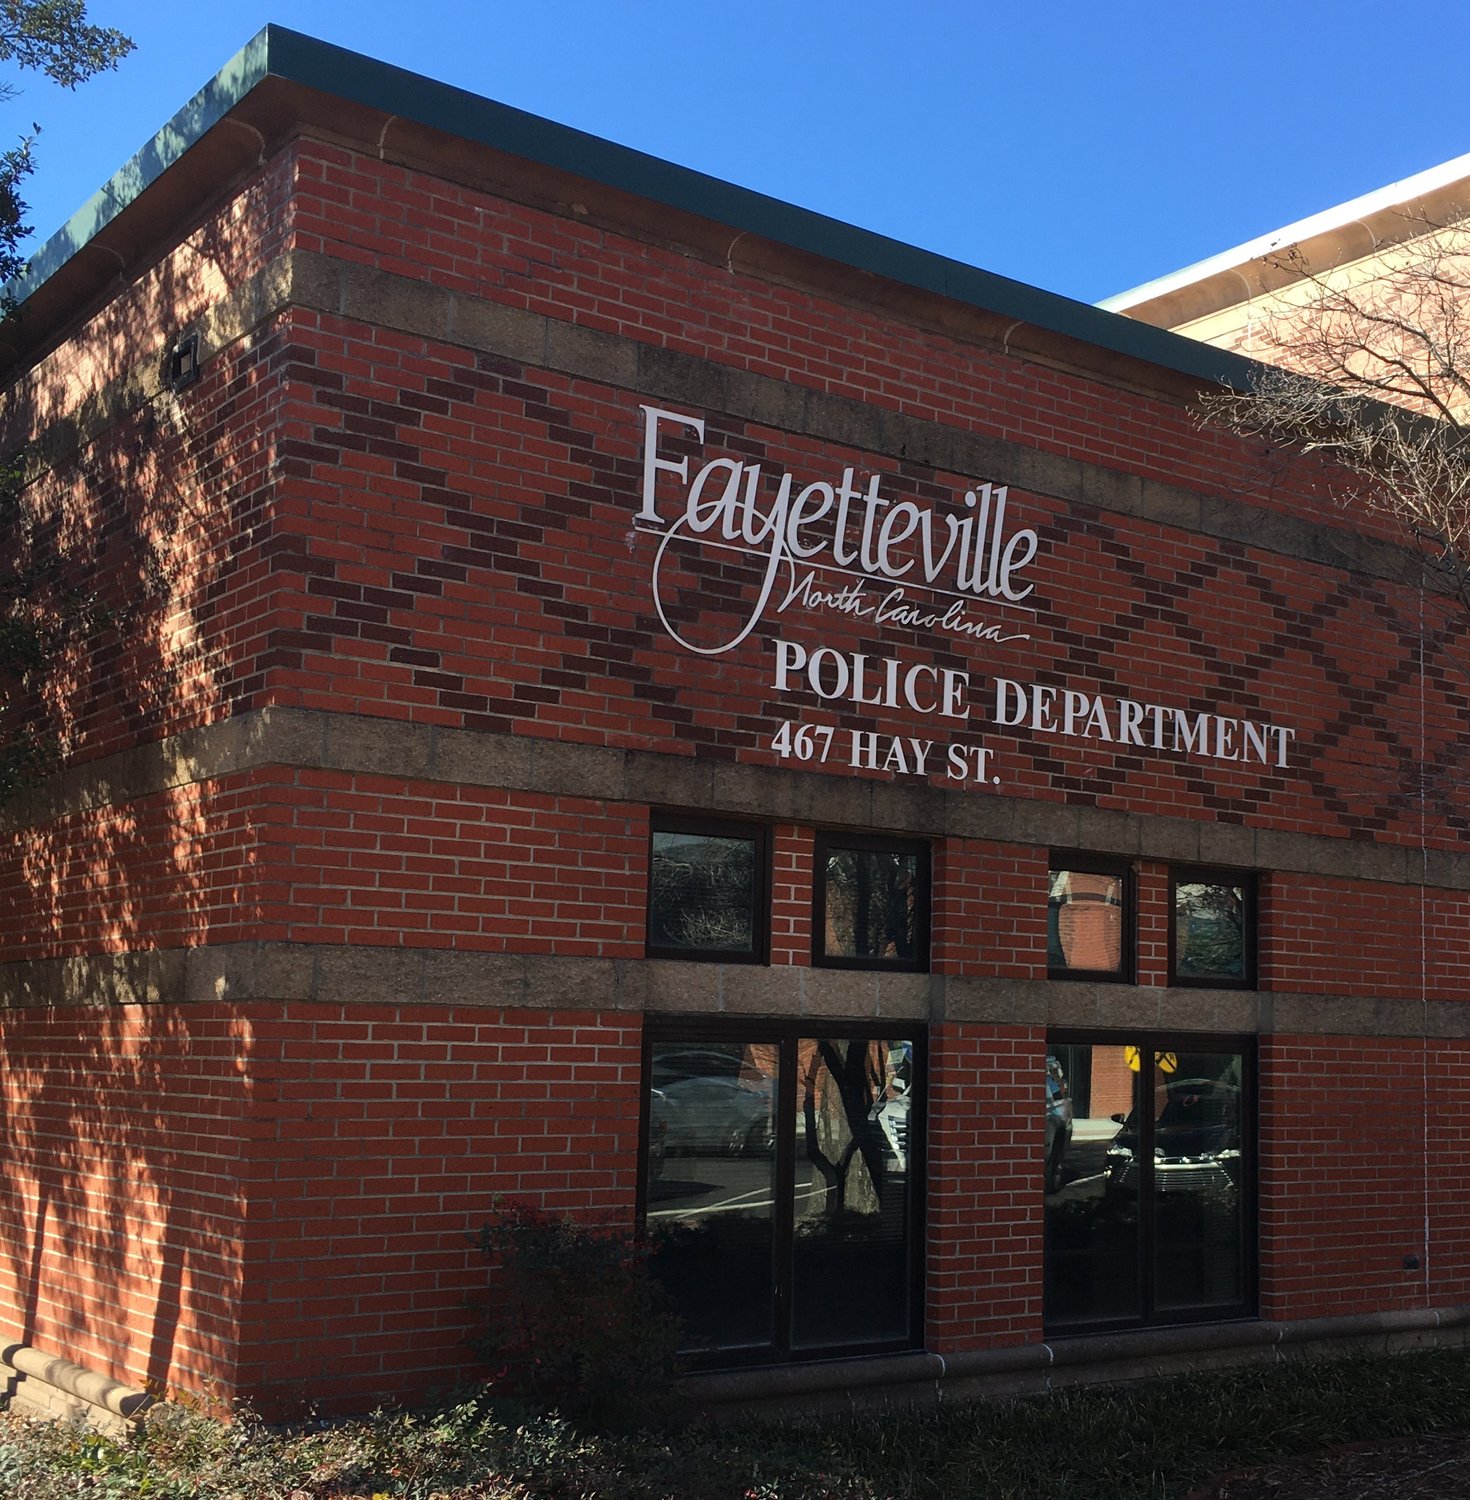 A recently released report on the performance of the Fayetteville Police Department omitted a section related to police recruitment and retention.